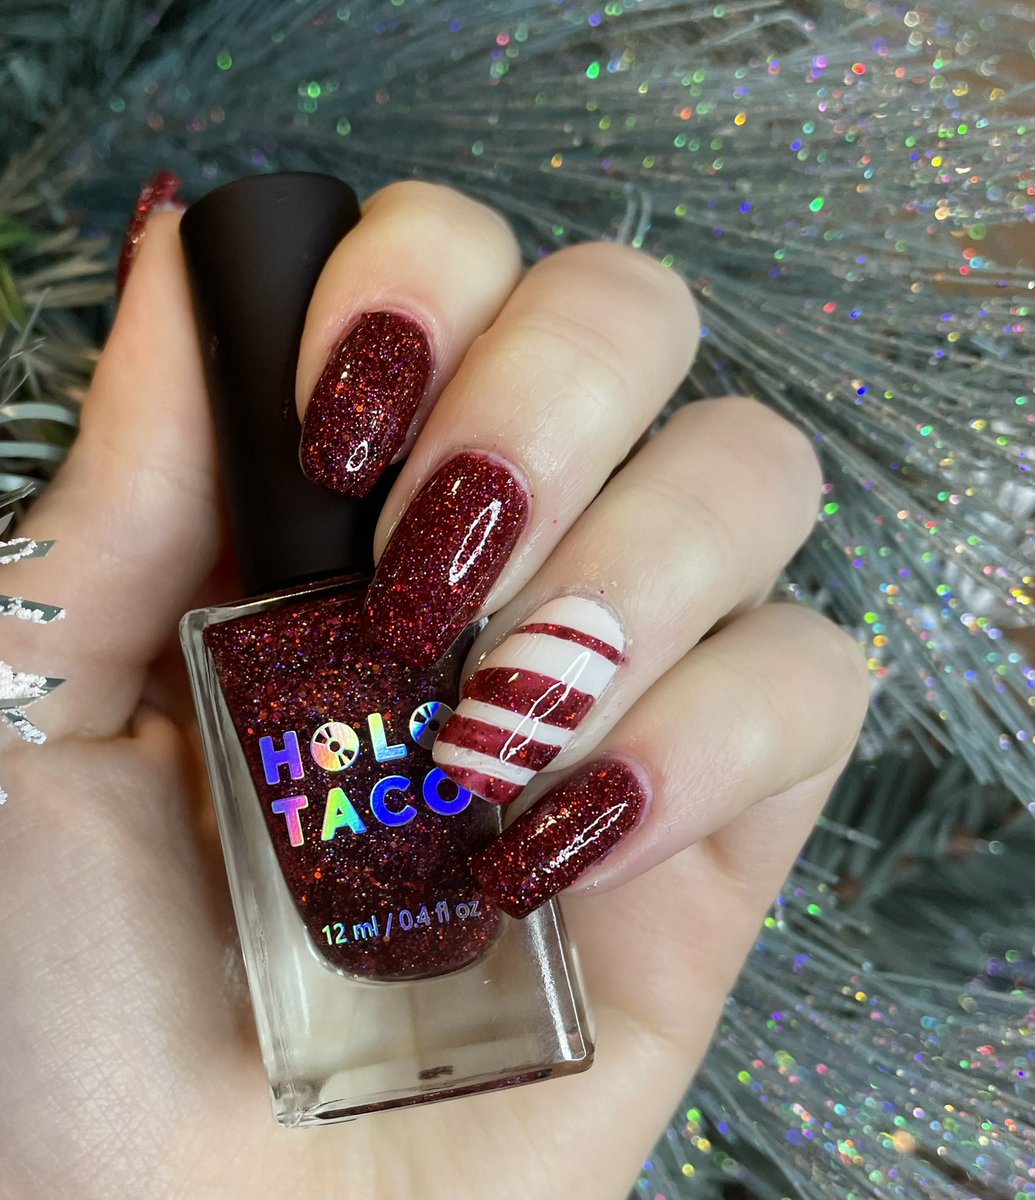 I’m going to Tokyo to celebrate Christmas so I had to make sure my mani was fresh 💅🏻🤷🏼‍♀️ If you want to follow my nails around Tokyo then go follow my Instagram! 
Polishes used was Holo Taco’s Not Milky White and Naughty List.

#HoloTaco #paintwithsimply #NaughtyList #NotMilkyWhite